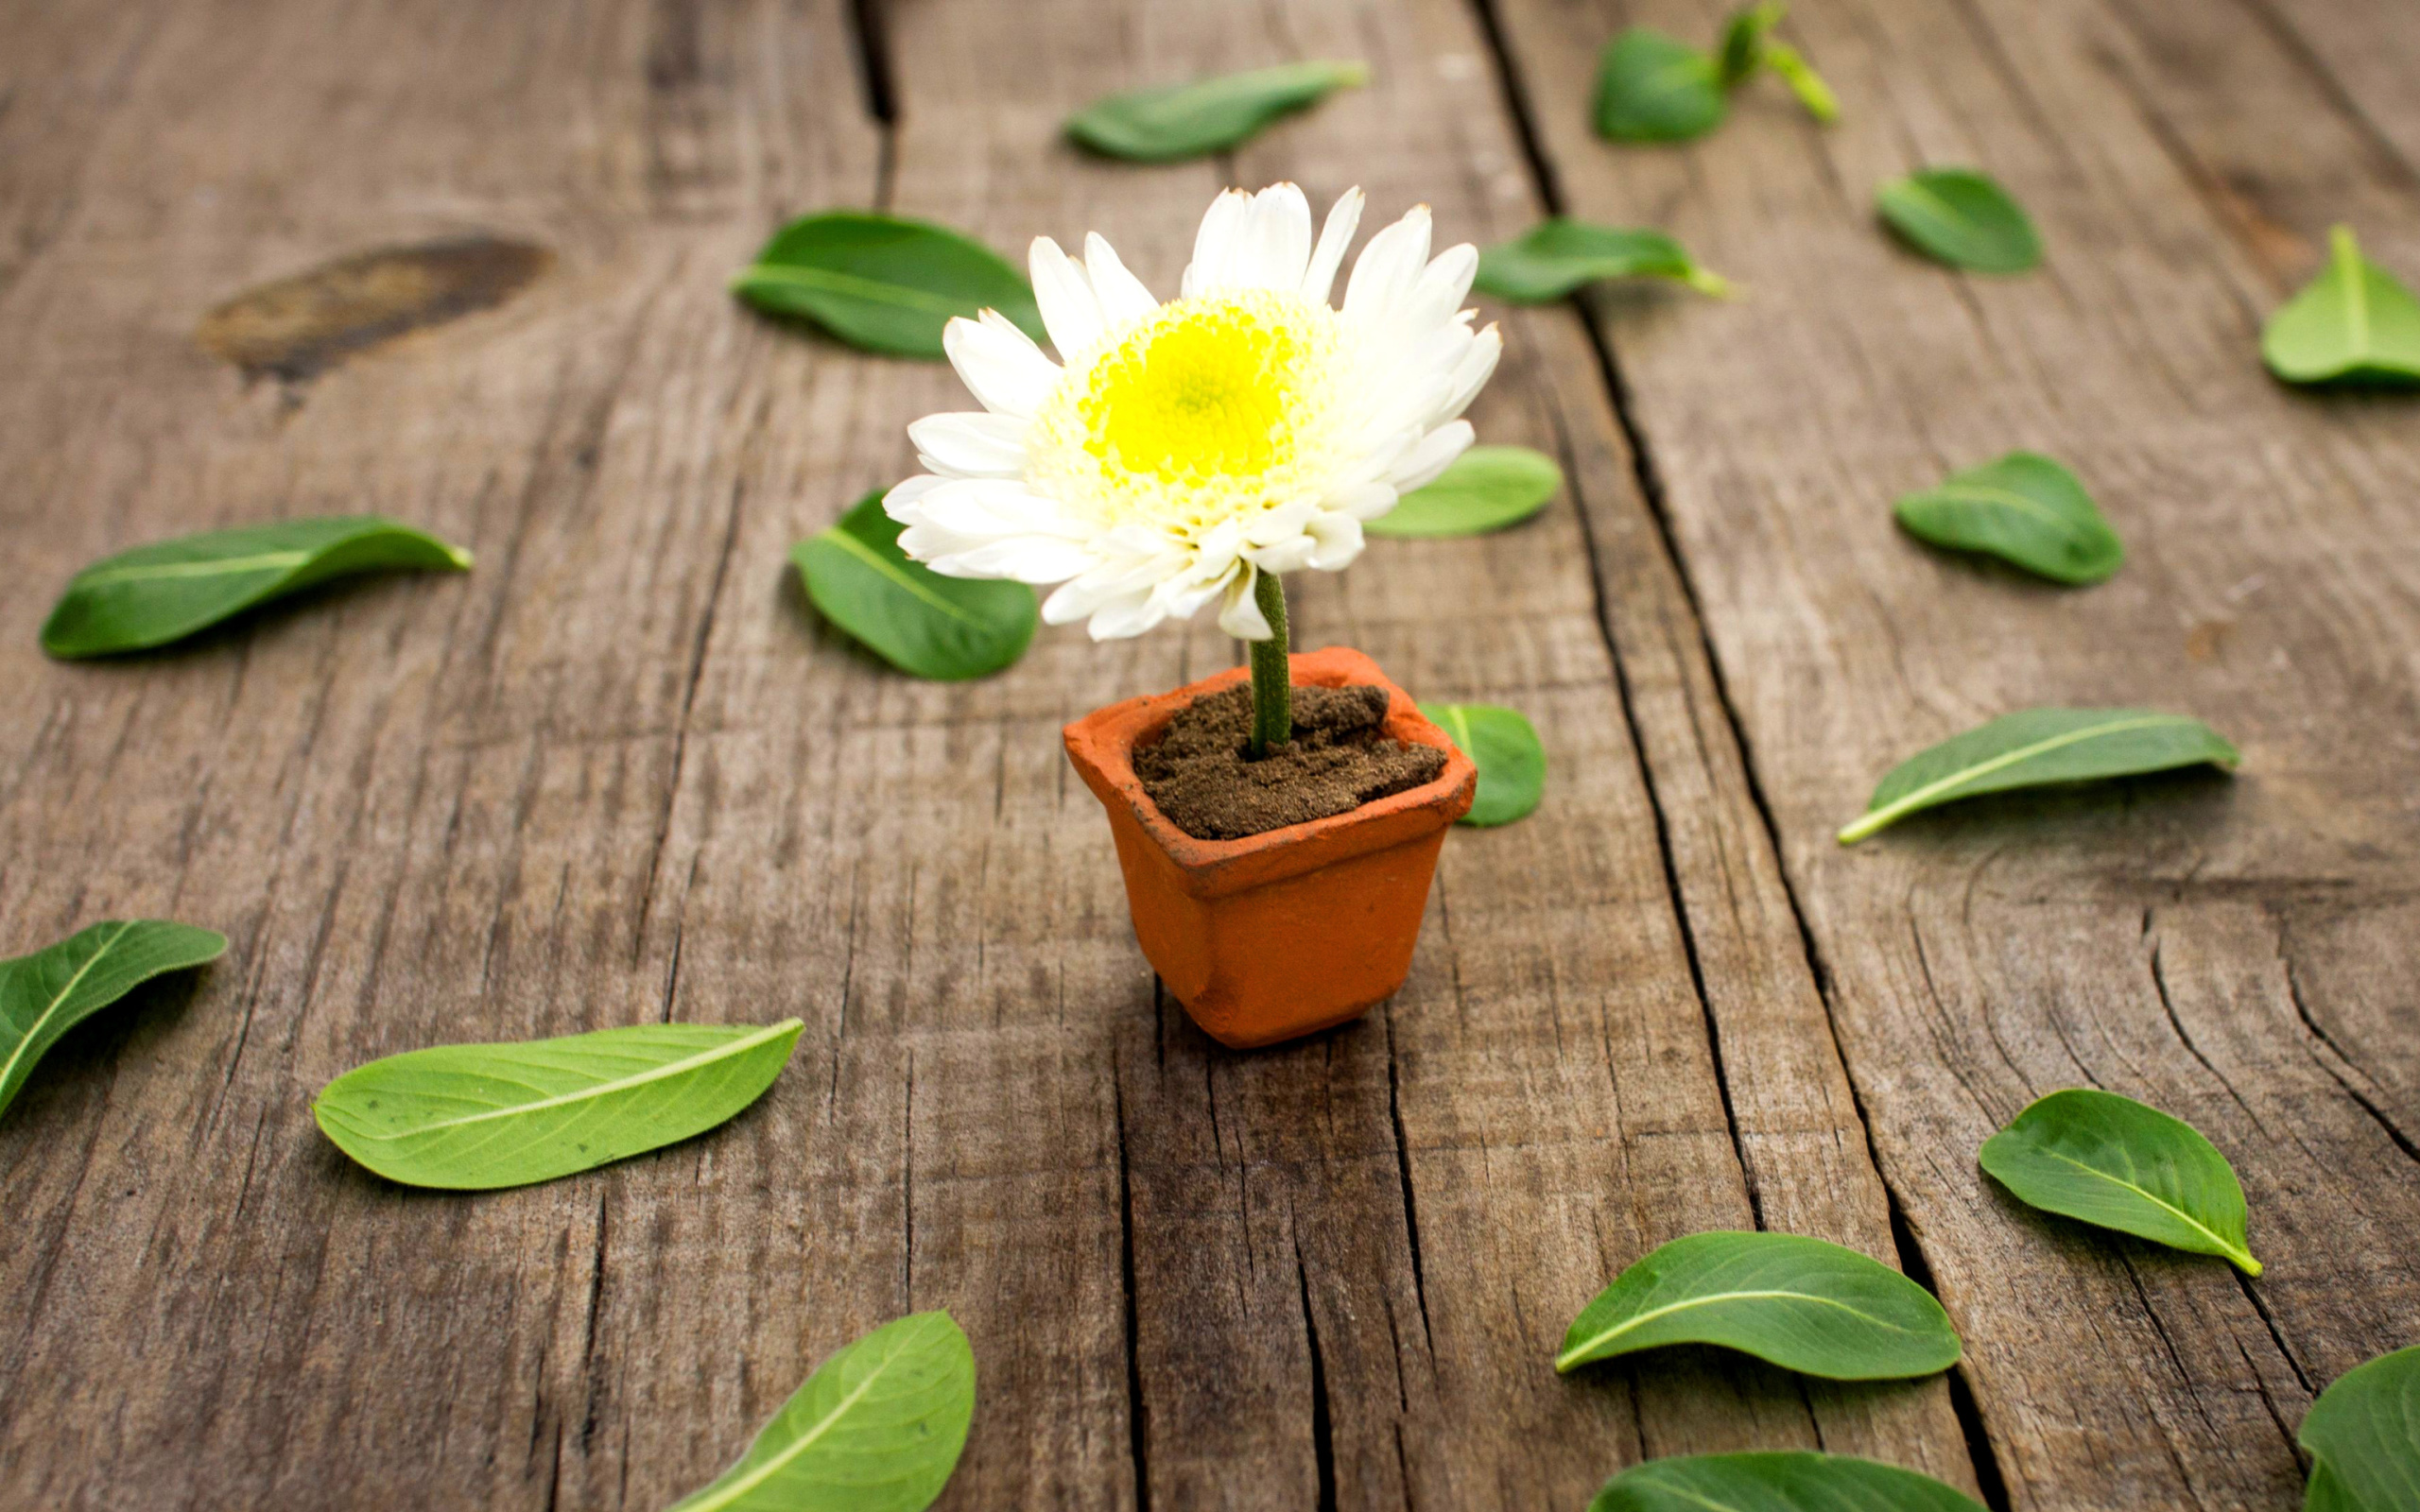 How to grow Daisies wallpaper 2560x1600